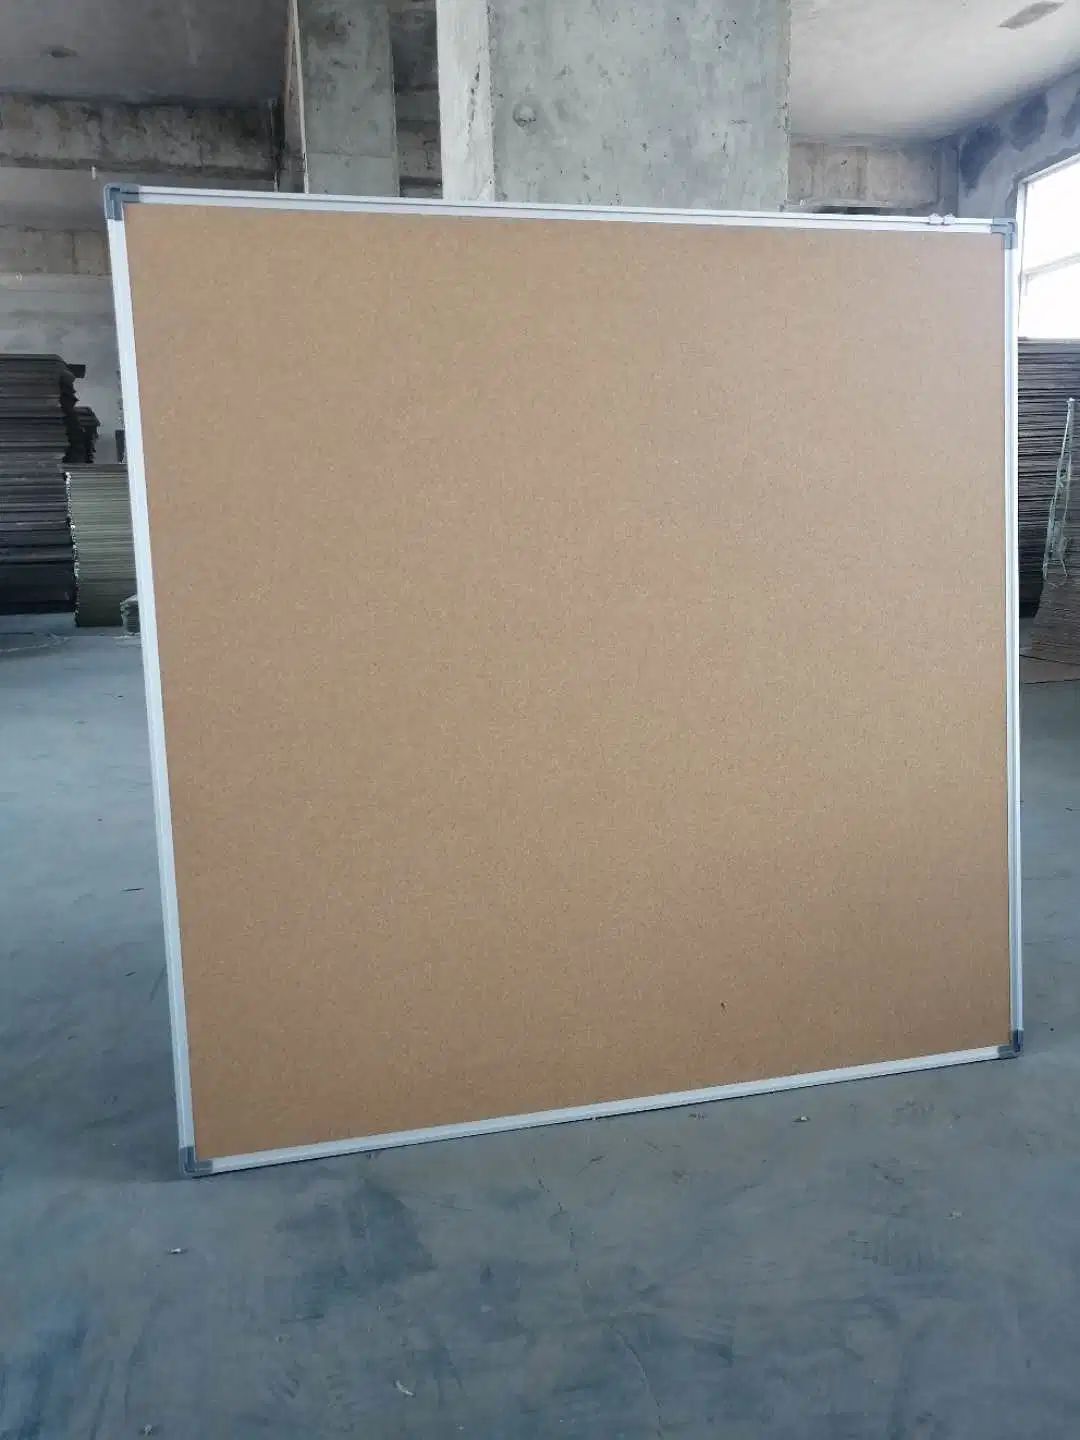 Notice Board Message Board Corkboard with Pins in Aluminum Frame